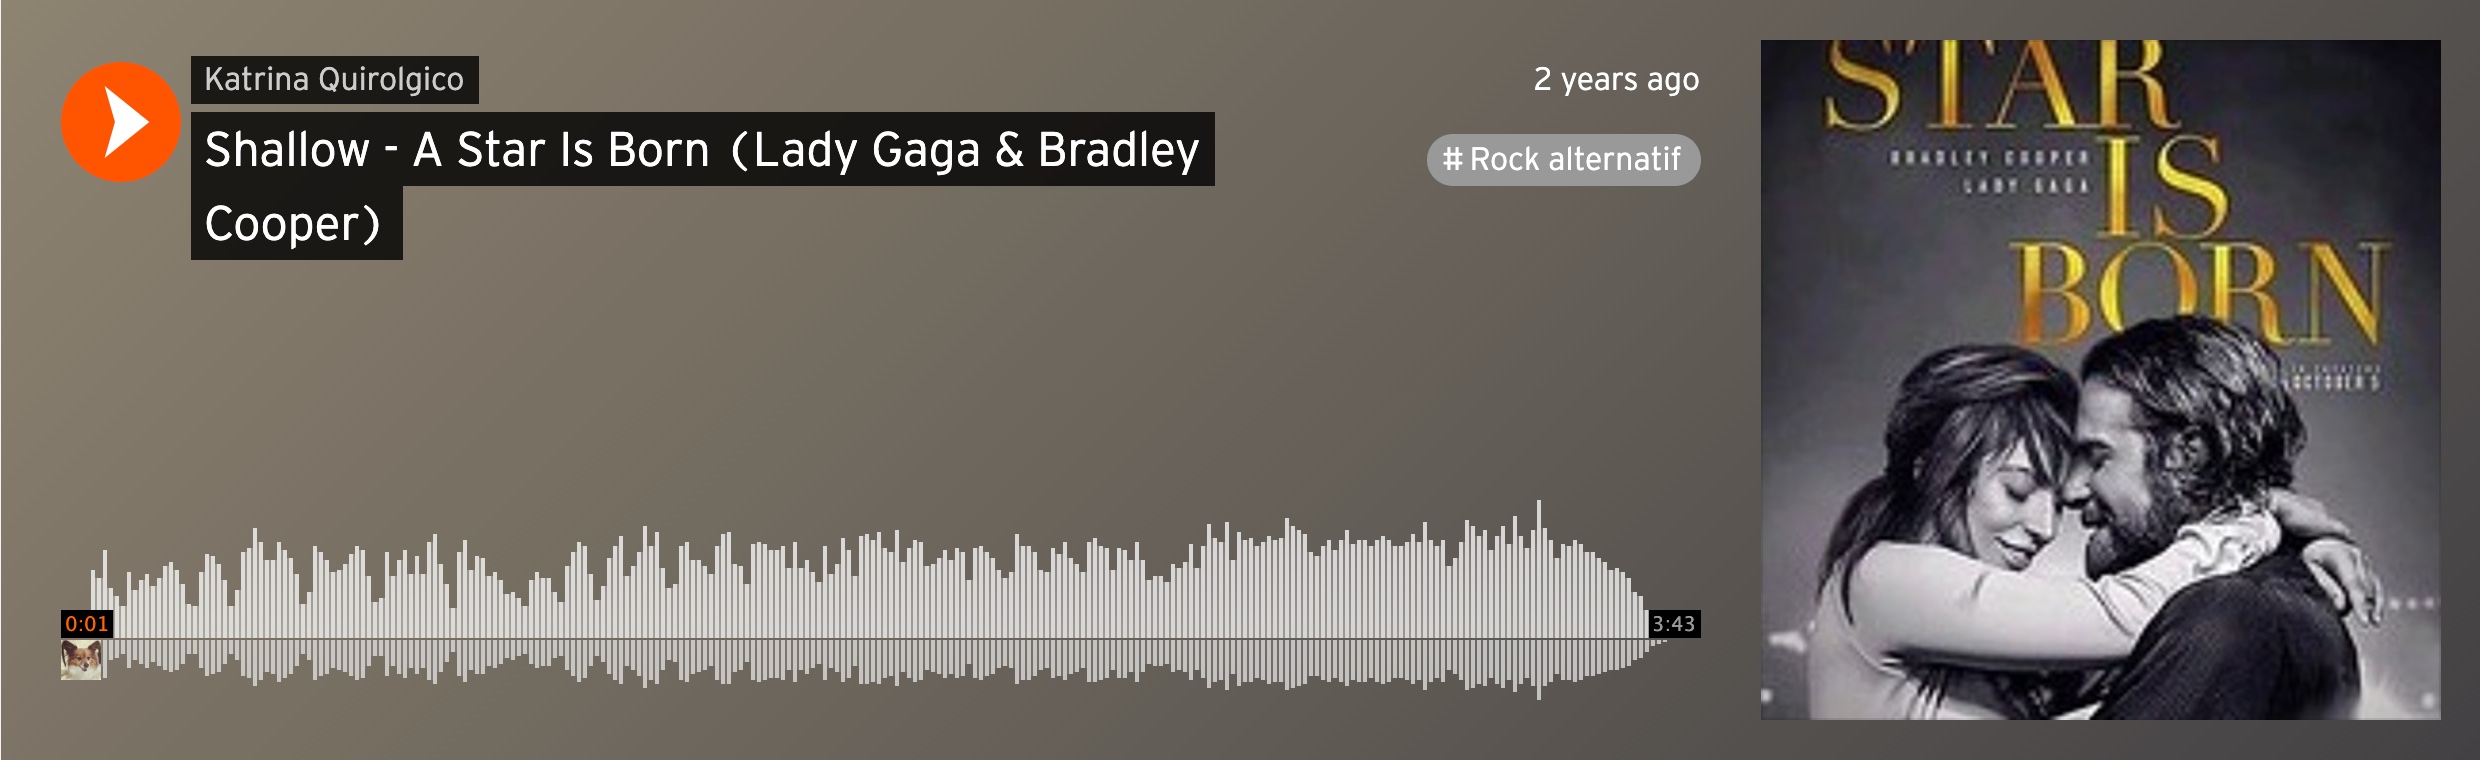 Image linking to SoundCloud recording of Katrina Quirolgico's rendition of Shallow from A Star is Born